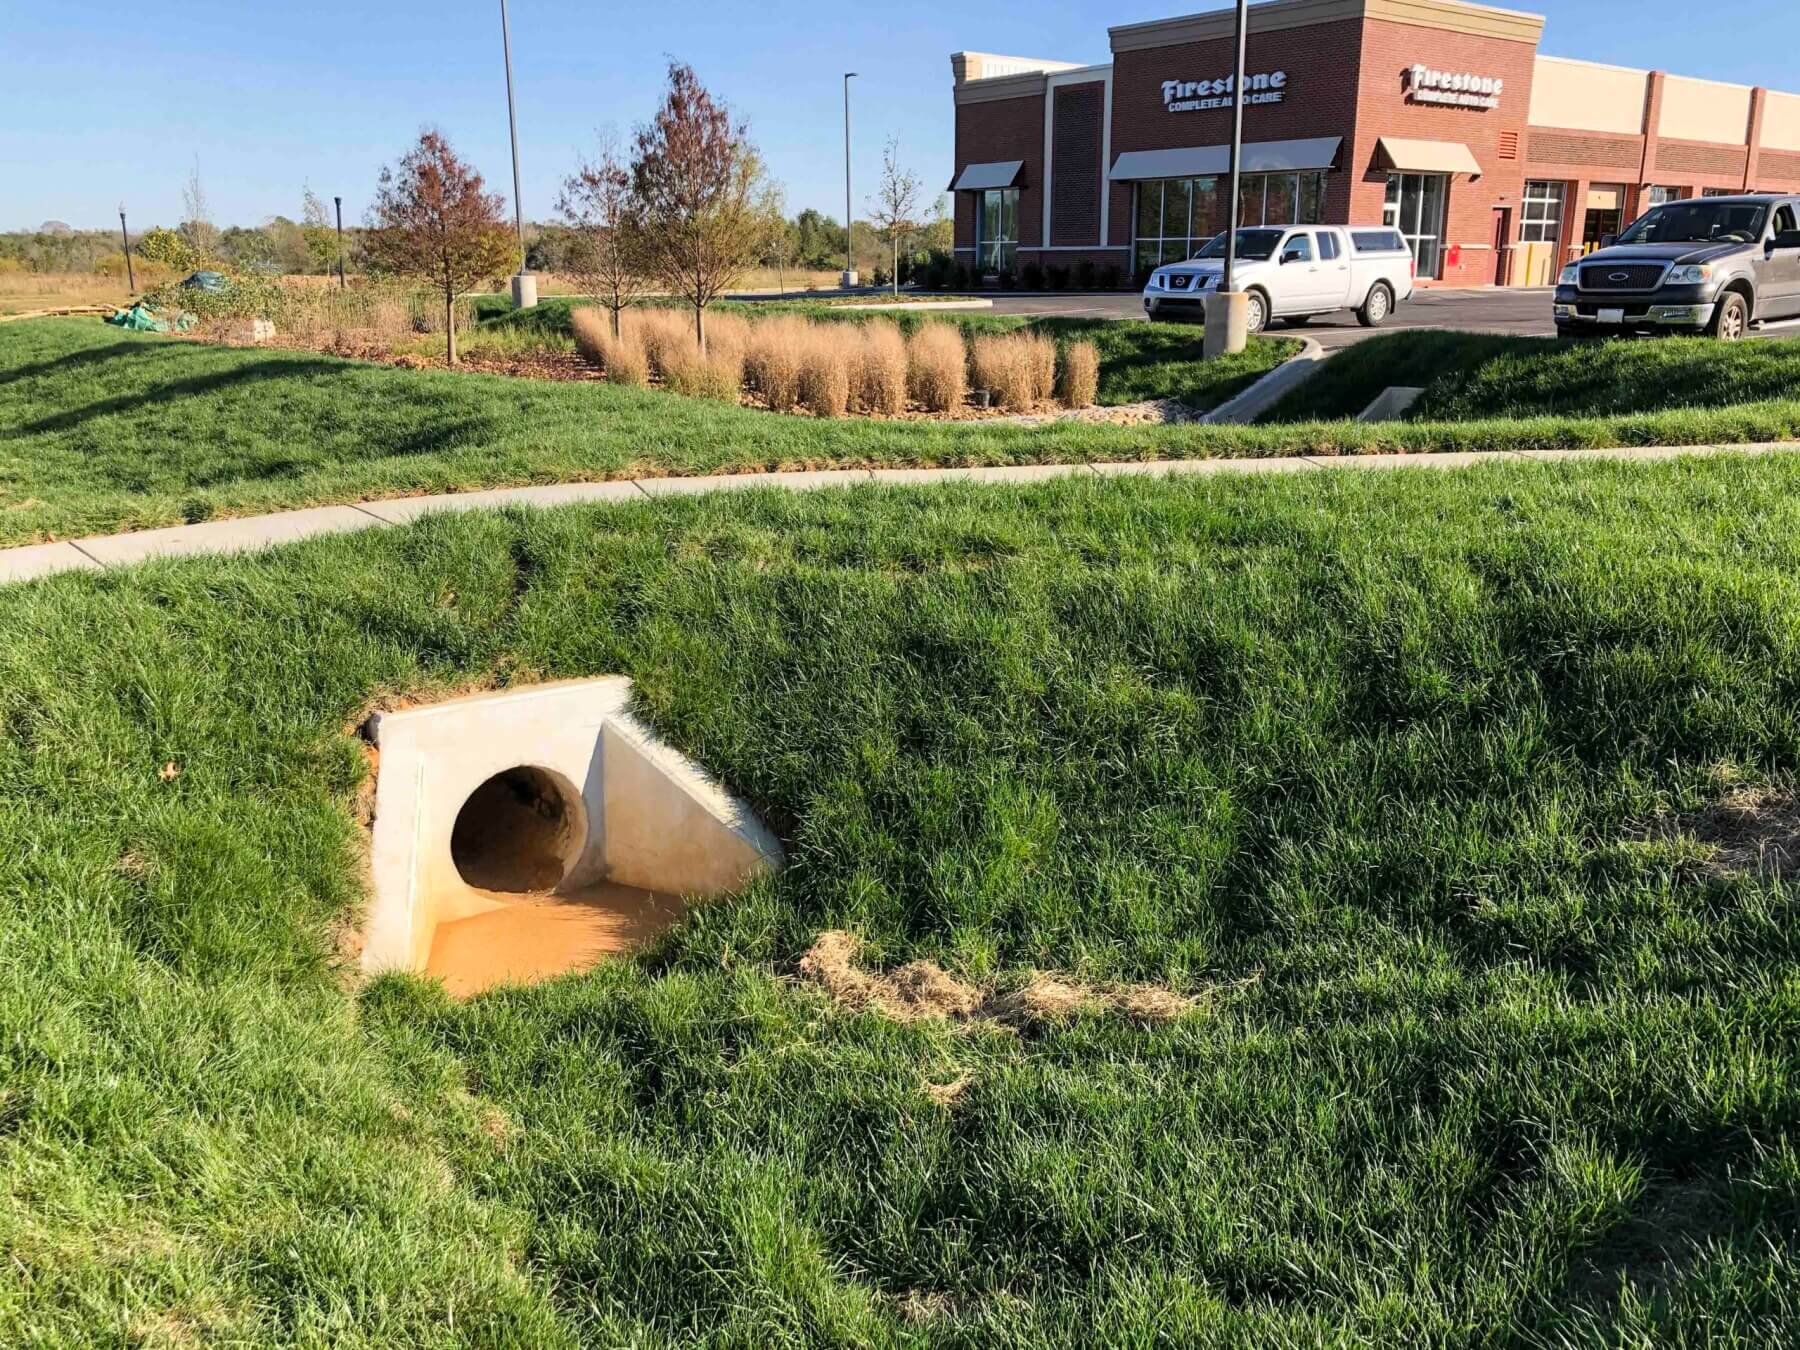 Stormwater infrastructure in front of a Firestone store